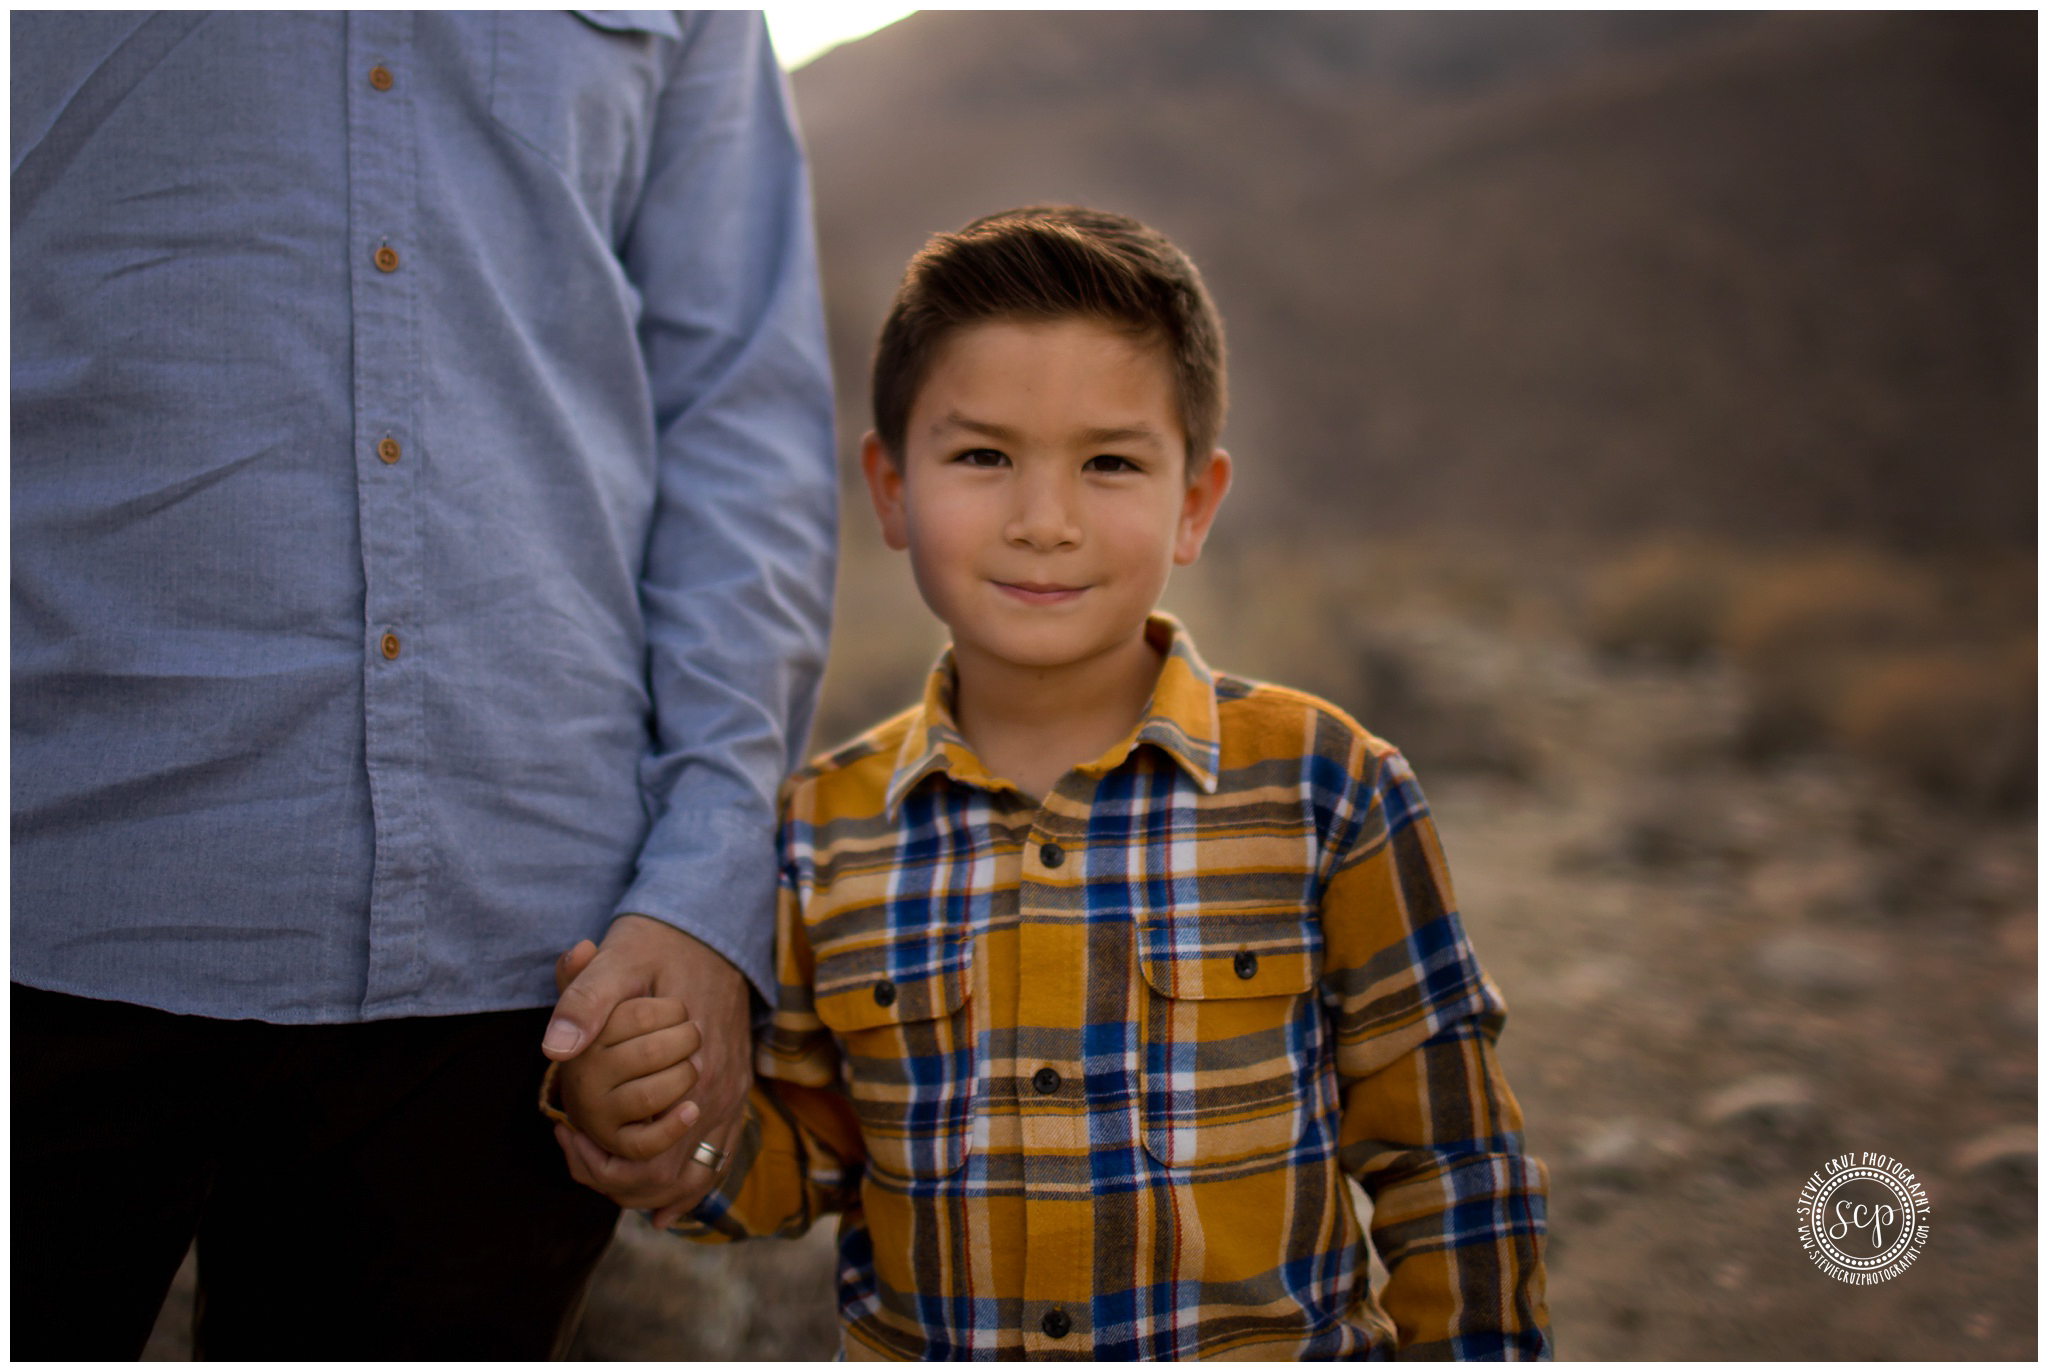 Plaid is always great outfit option for boys during family pictures. Photo by Stevie Cruz Photography